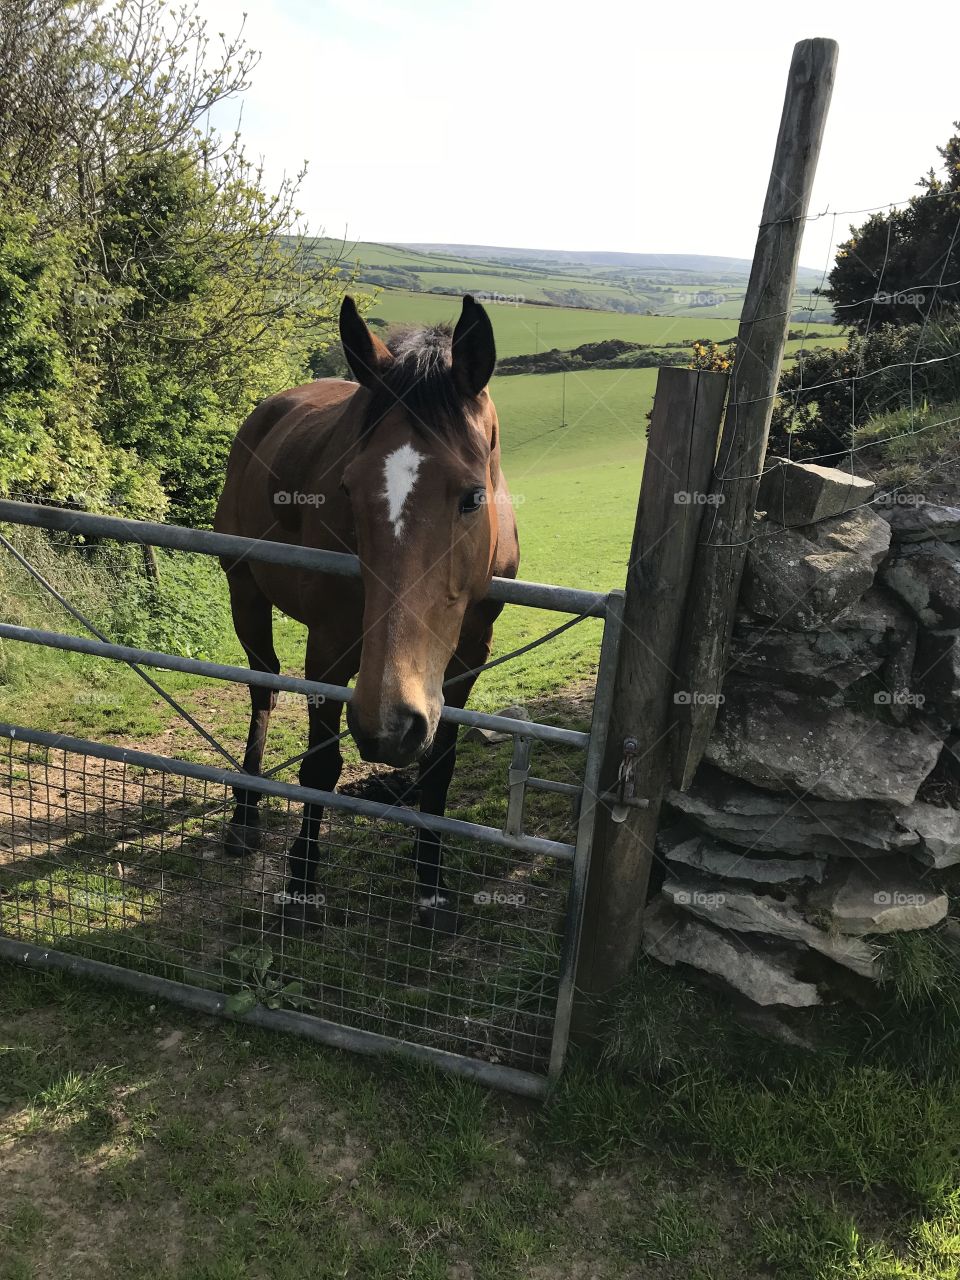 This. beautiful Exmoor pony visited me at this gate against a backdrop of sumptuous Somerset beauty.